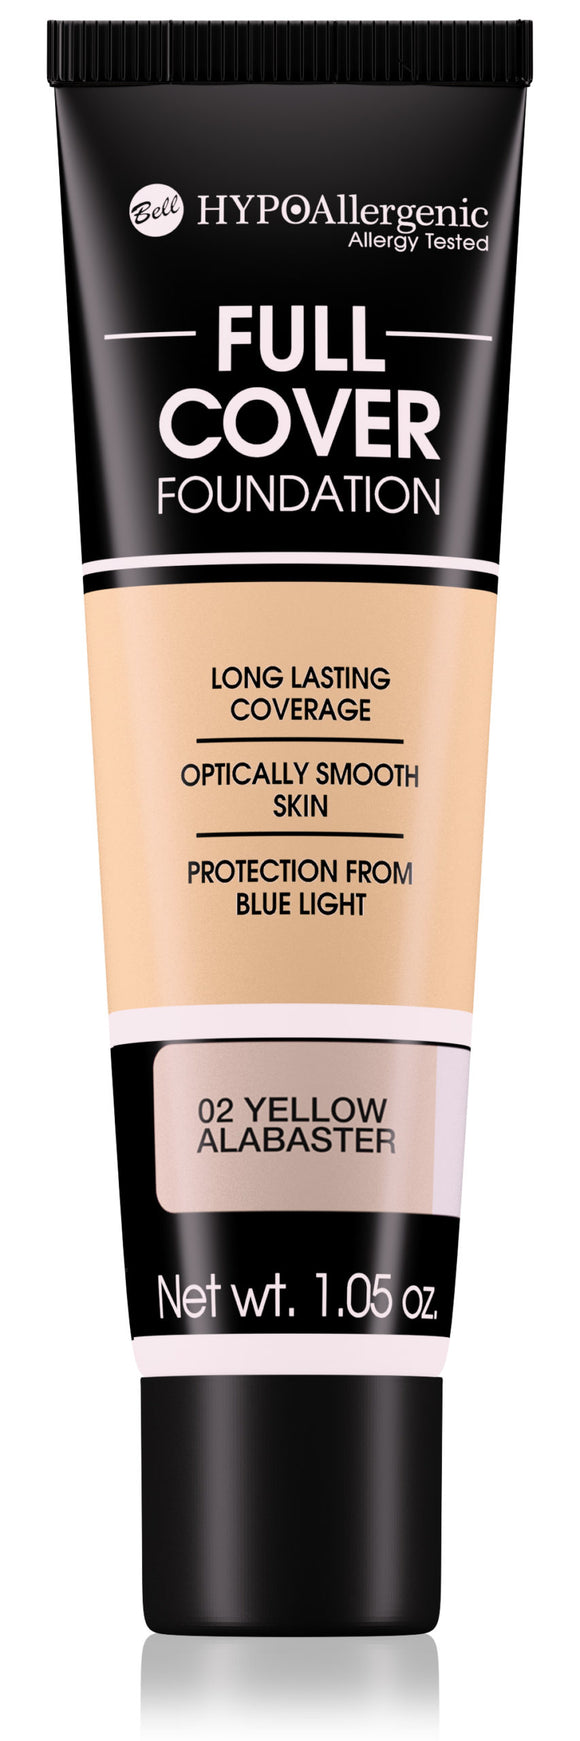 Bell Hypoallergenic Full Cover Foundation 02 Yellow Alabaster 30g